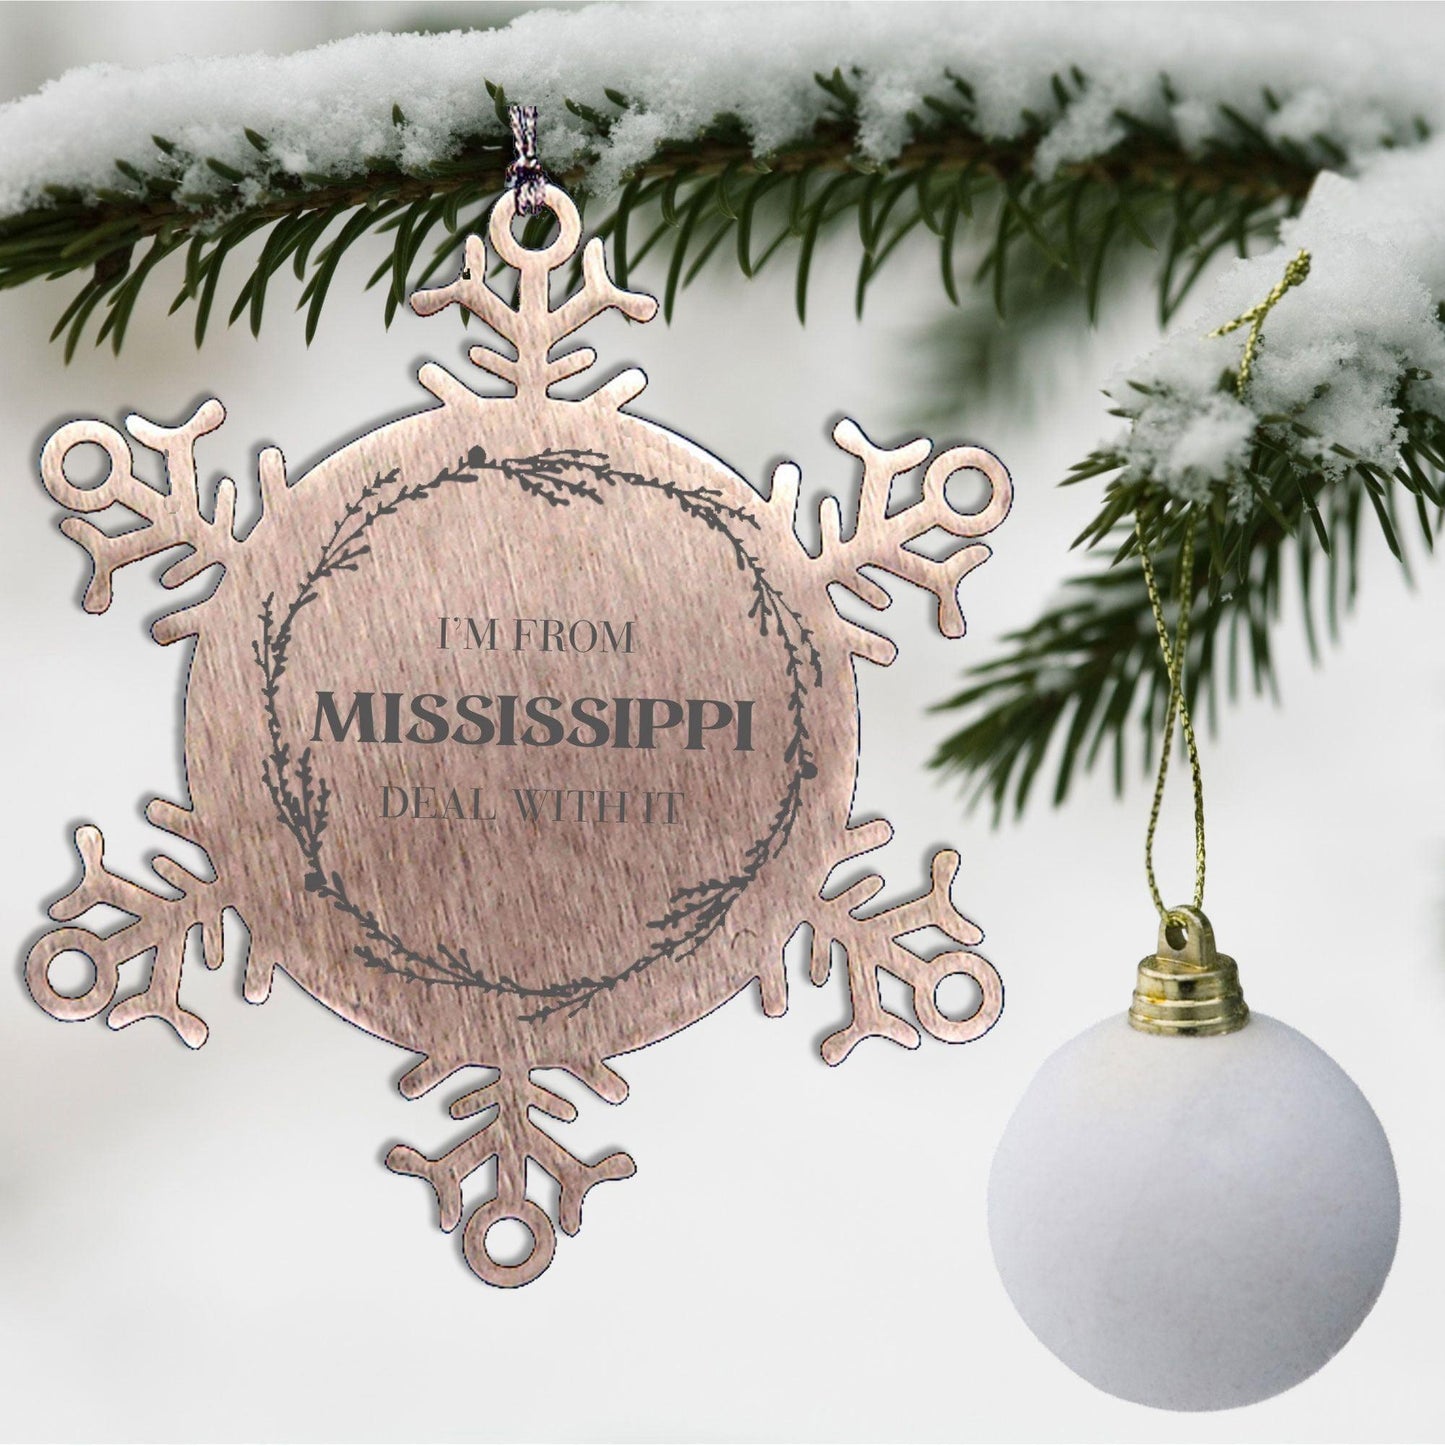 I'm from Mississippi, Deal with it, Proud Mississippi State Ornament Gifts, Mississippi Snowflake Ornament Gift Idea, Christmas Gifts for Mississippi People, Coworkers, Colleague - Mallard Moon Gift Shop